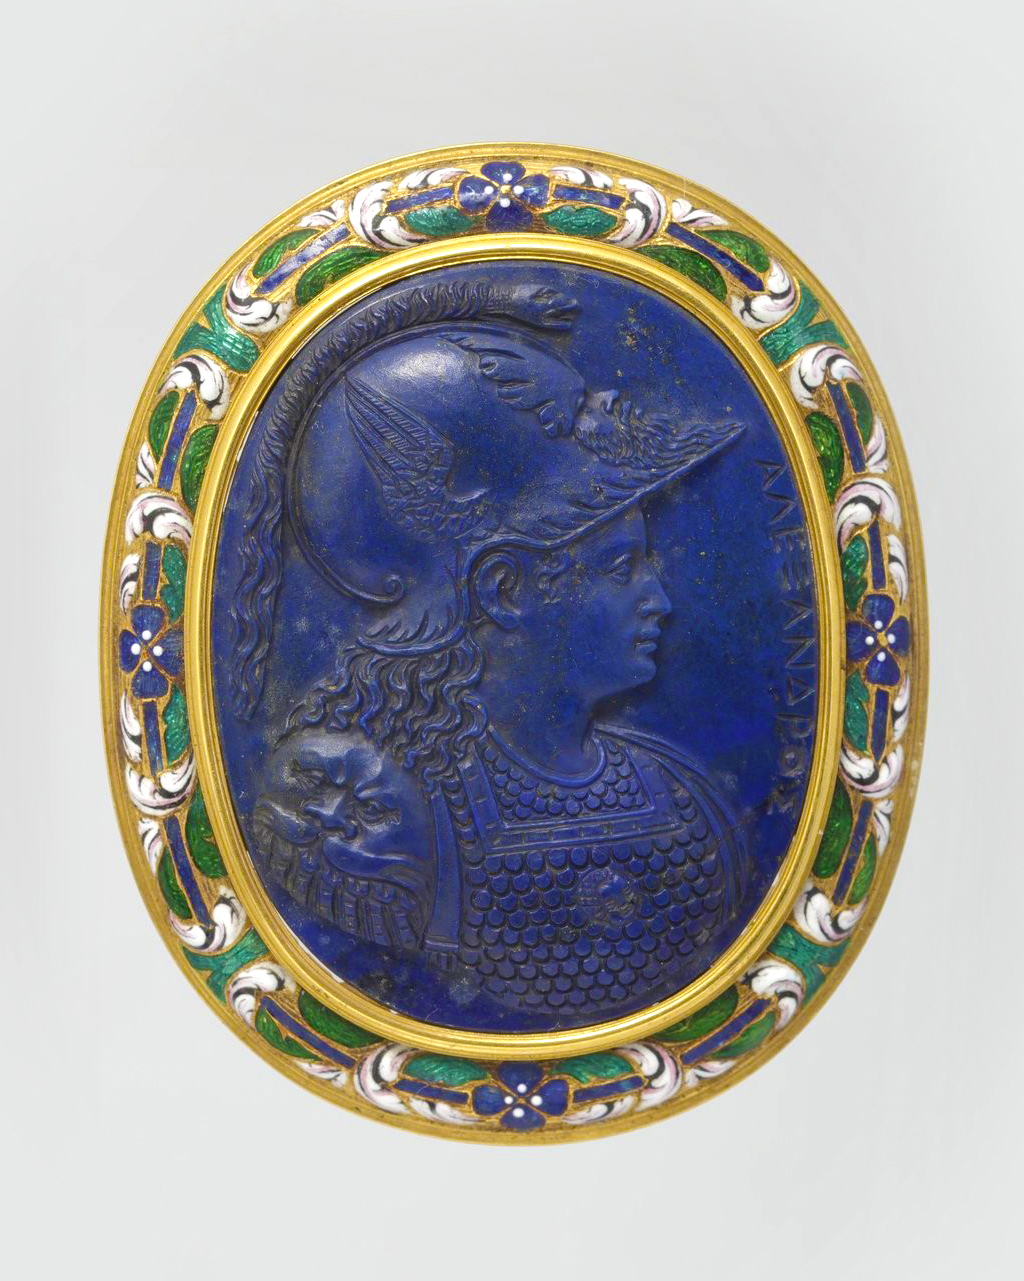 Toward an opus of Niccoló Avanzi, gem engraver of the late Quattrocento and early Cinquecento